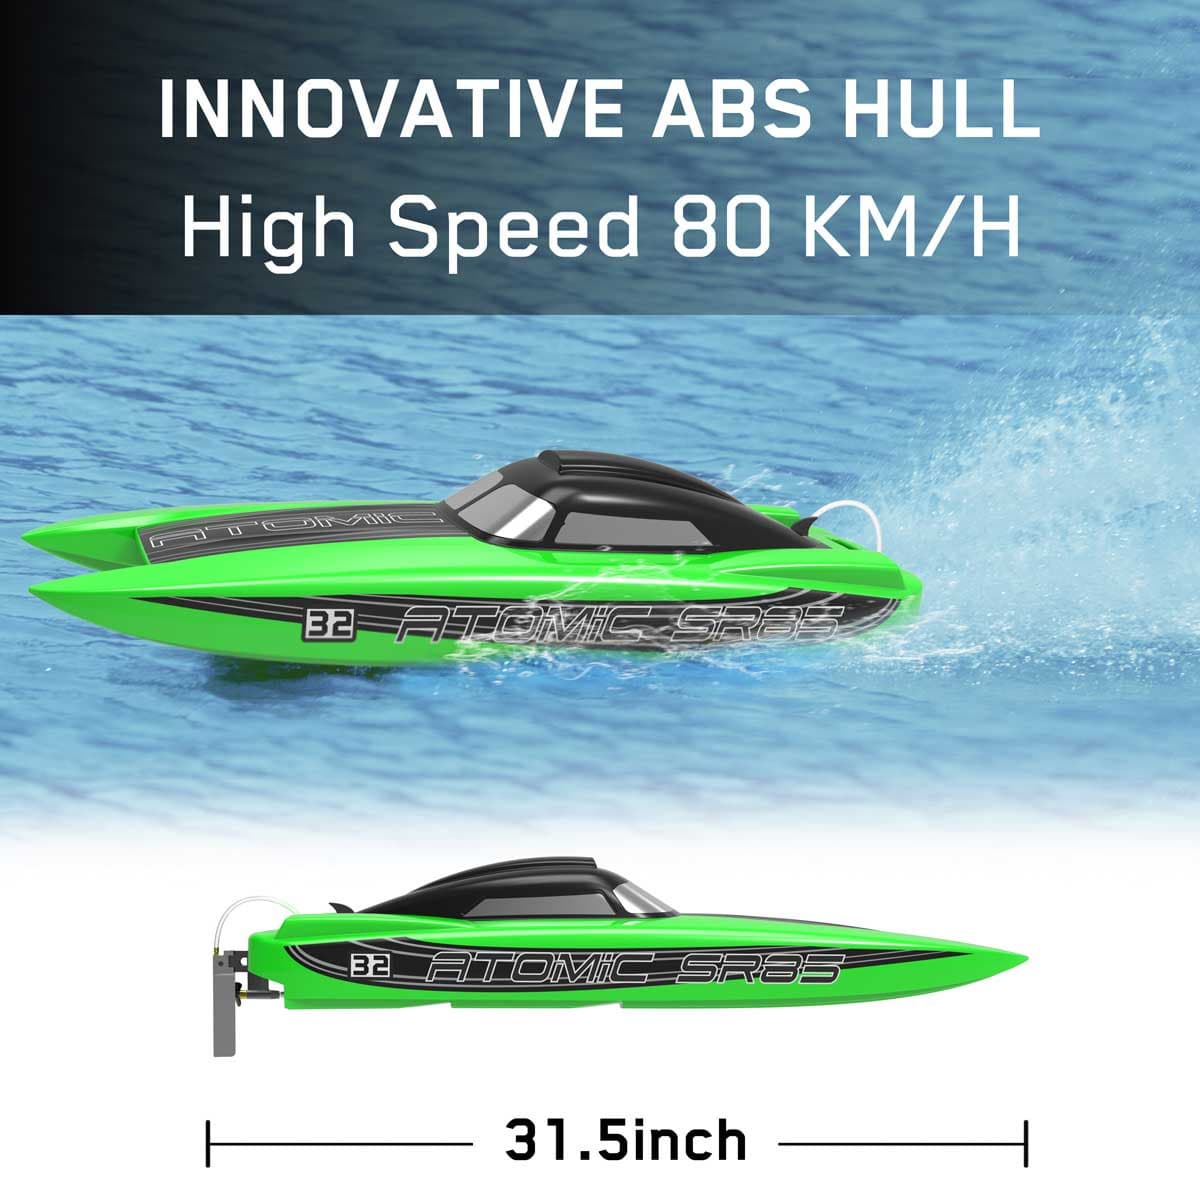 ATOMIC SR85 56mph Super High Speed Boat with Auto Roll Back Function and All Metal Hardwares (798-3) ARTR EXHOBBY.